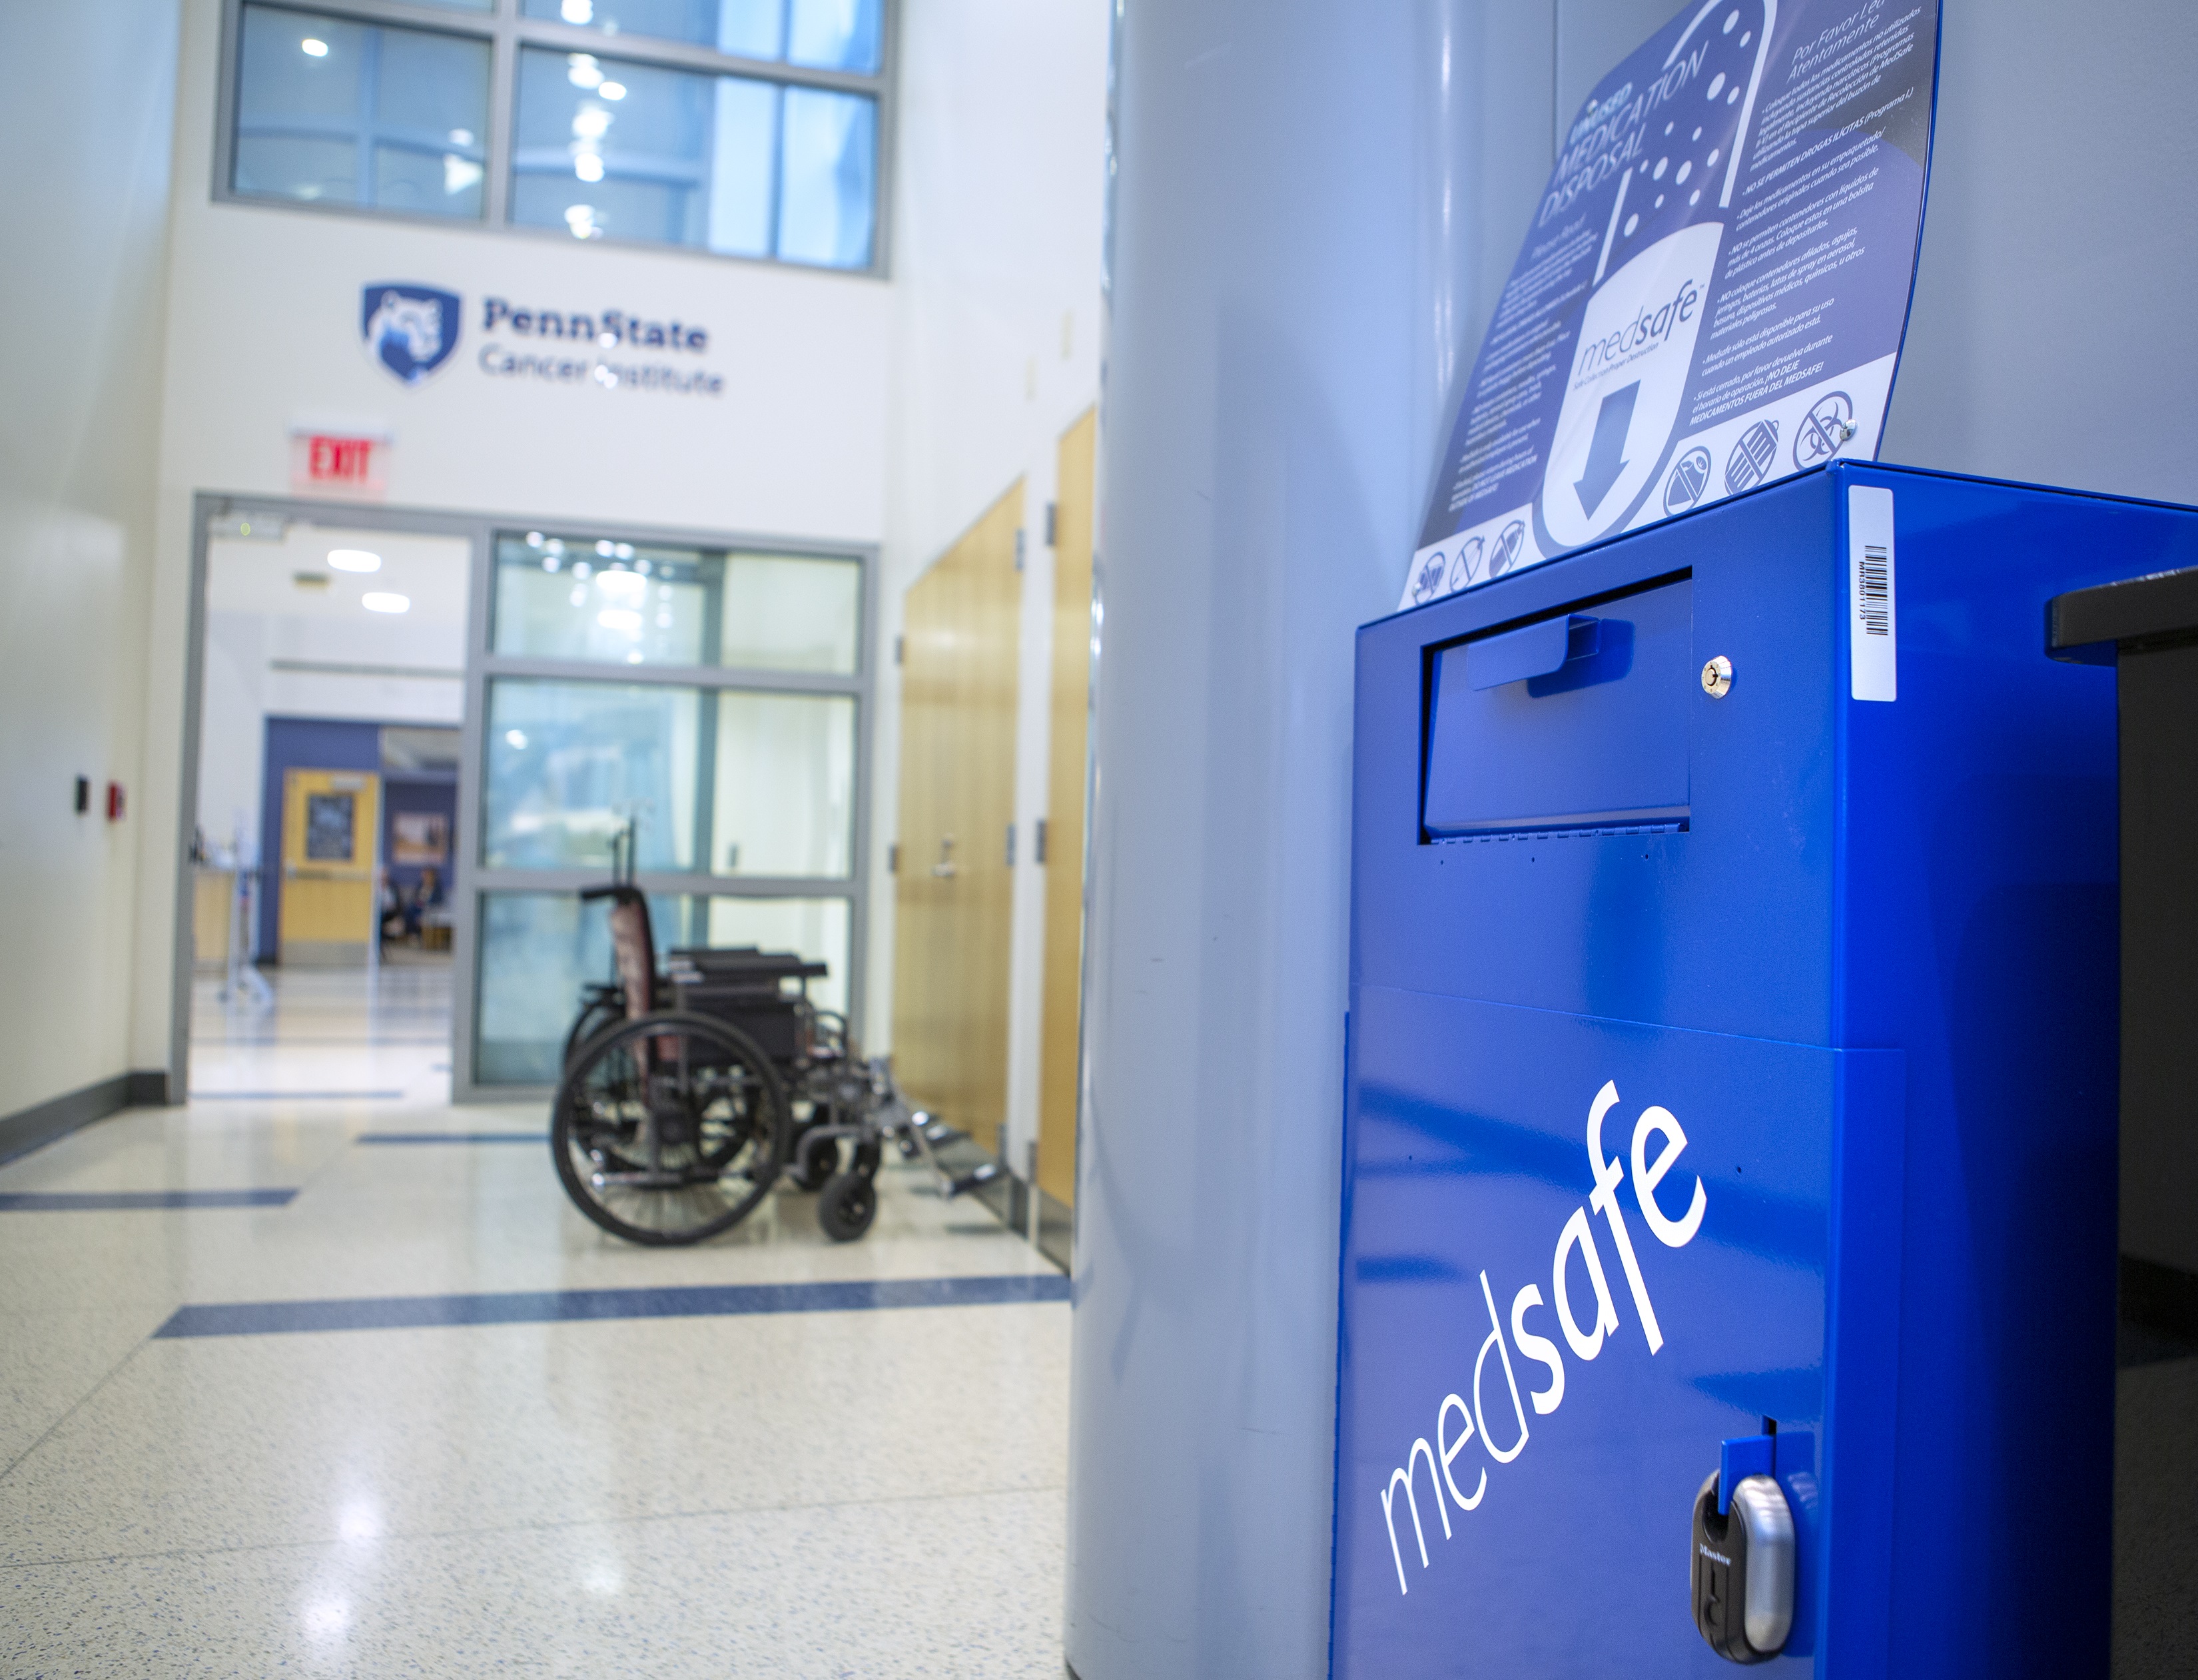 A box with the word “medsafe” written diagonally across the front sits in a hallway outside the Penn State Cancer Institute.